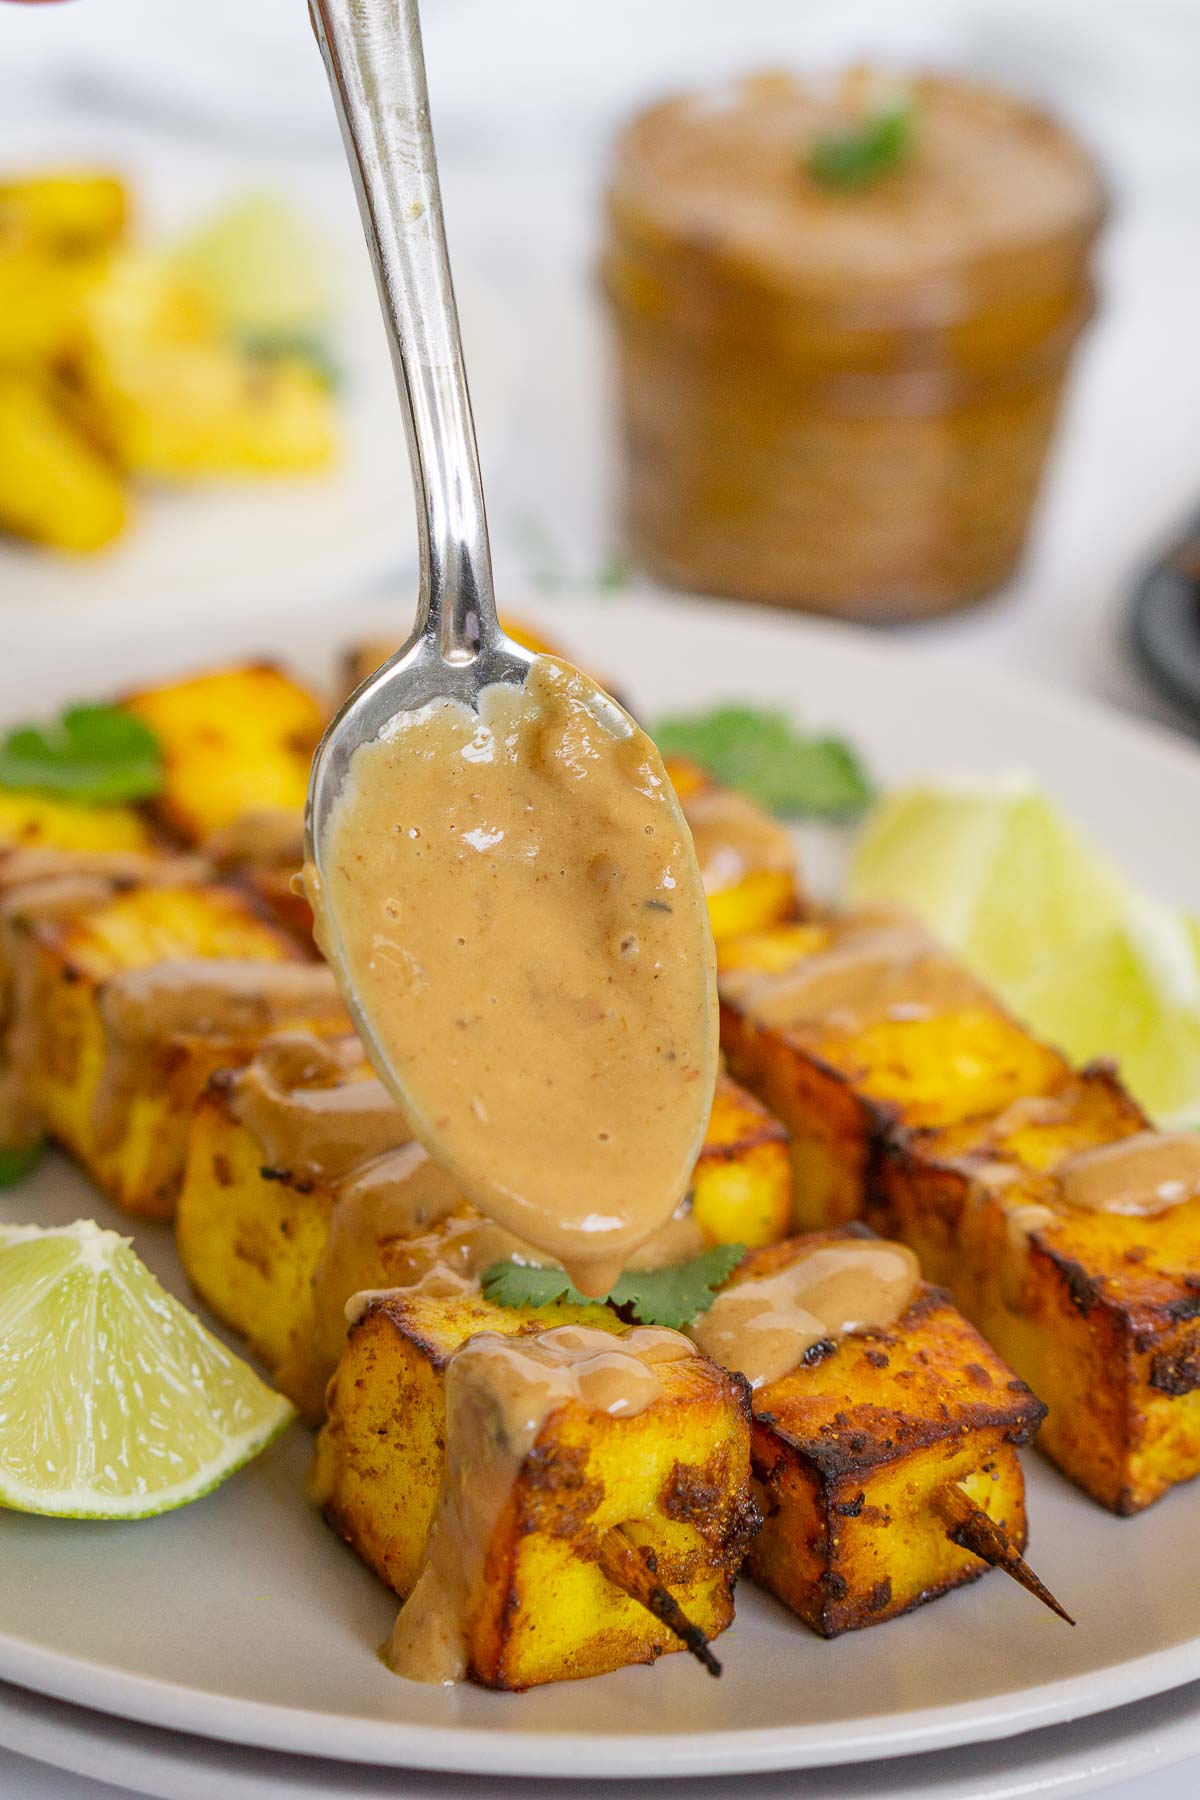 Drizzling paneer kebabs with peanut sauce